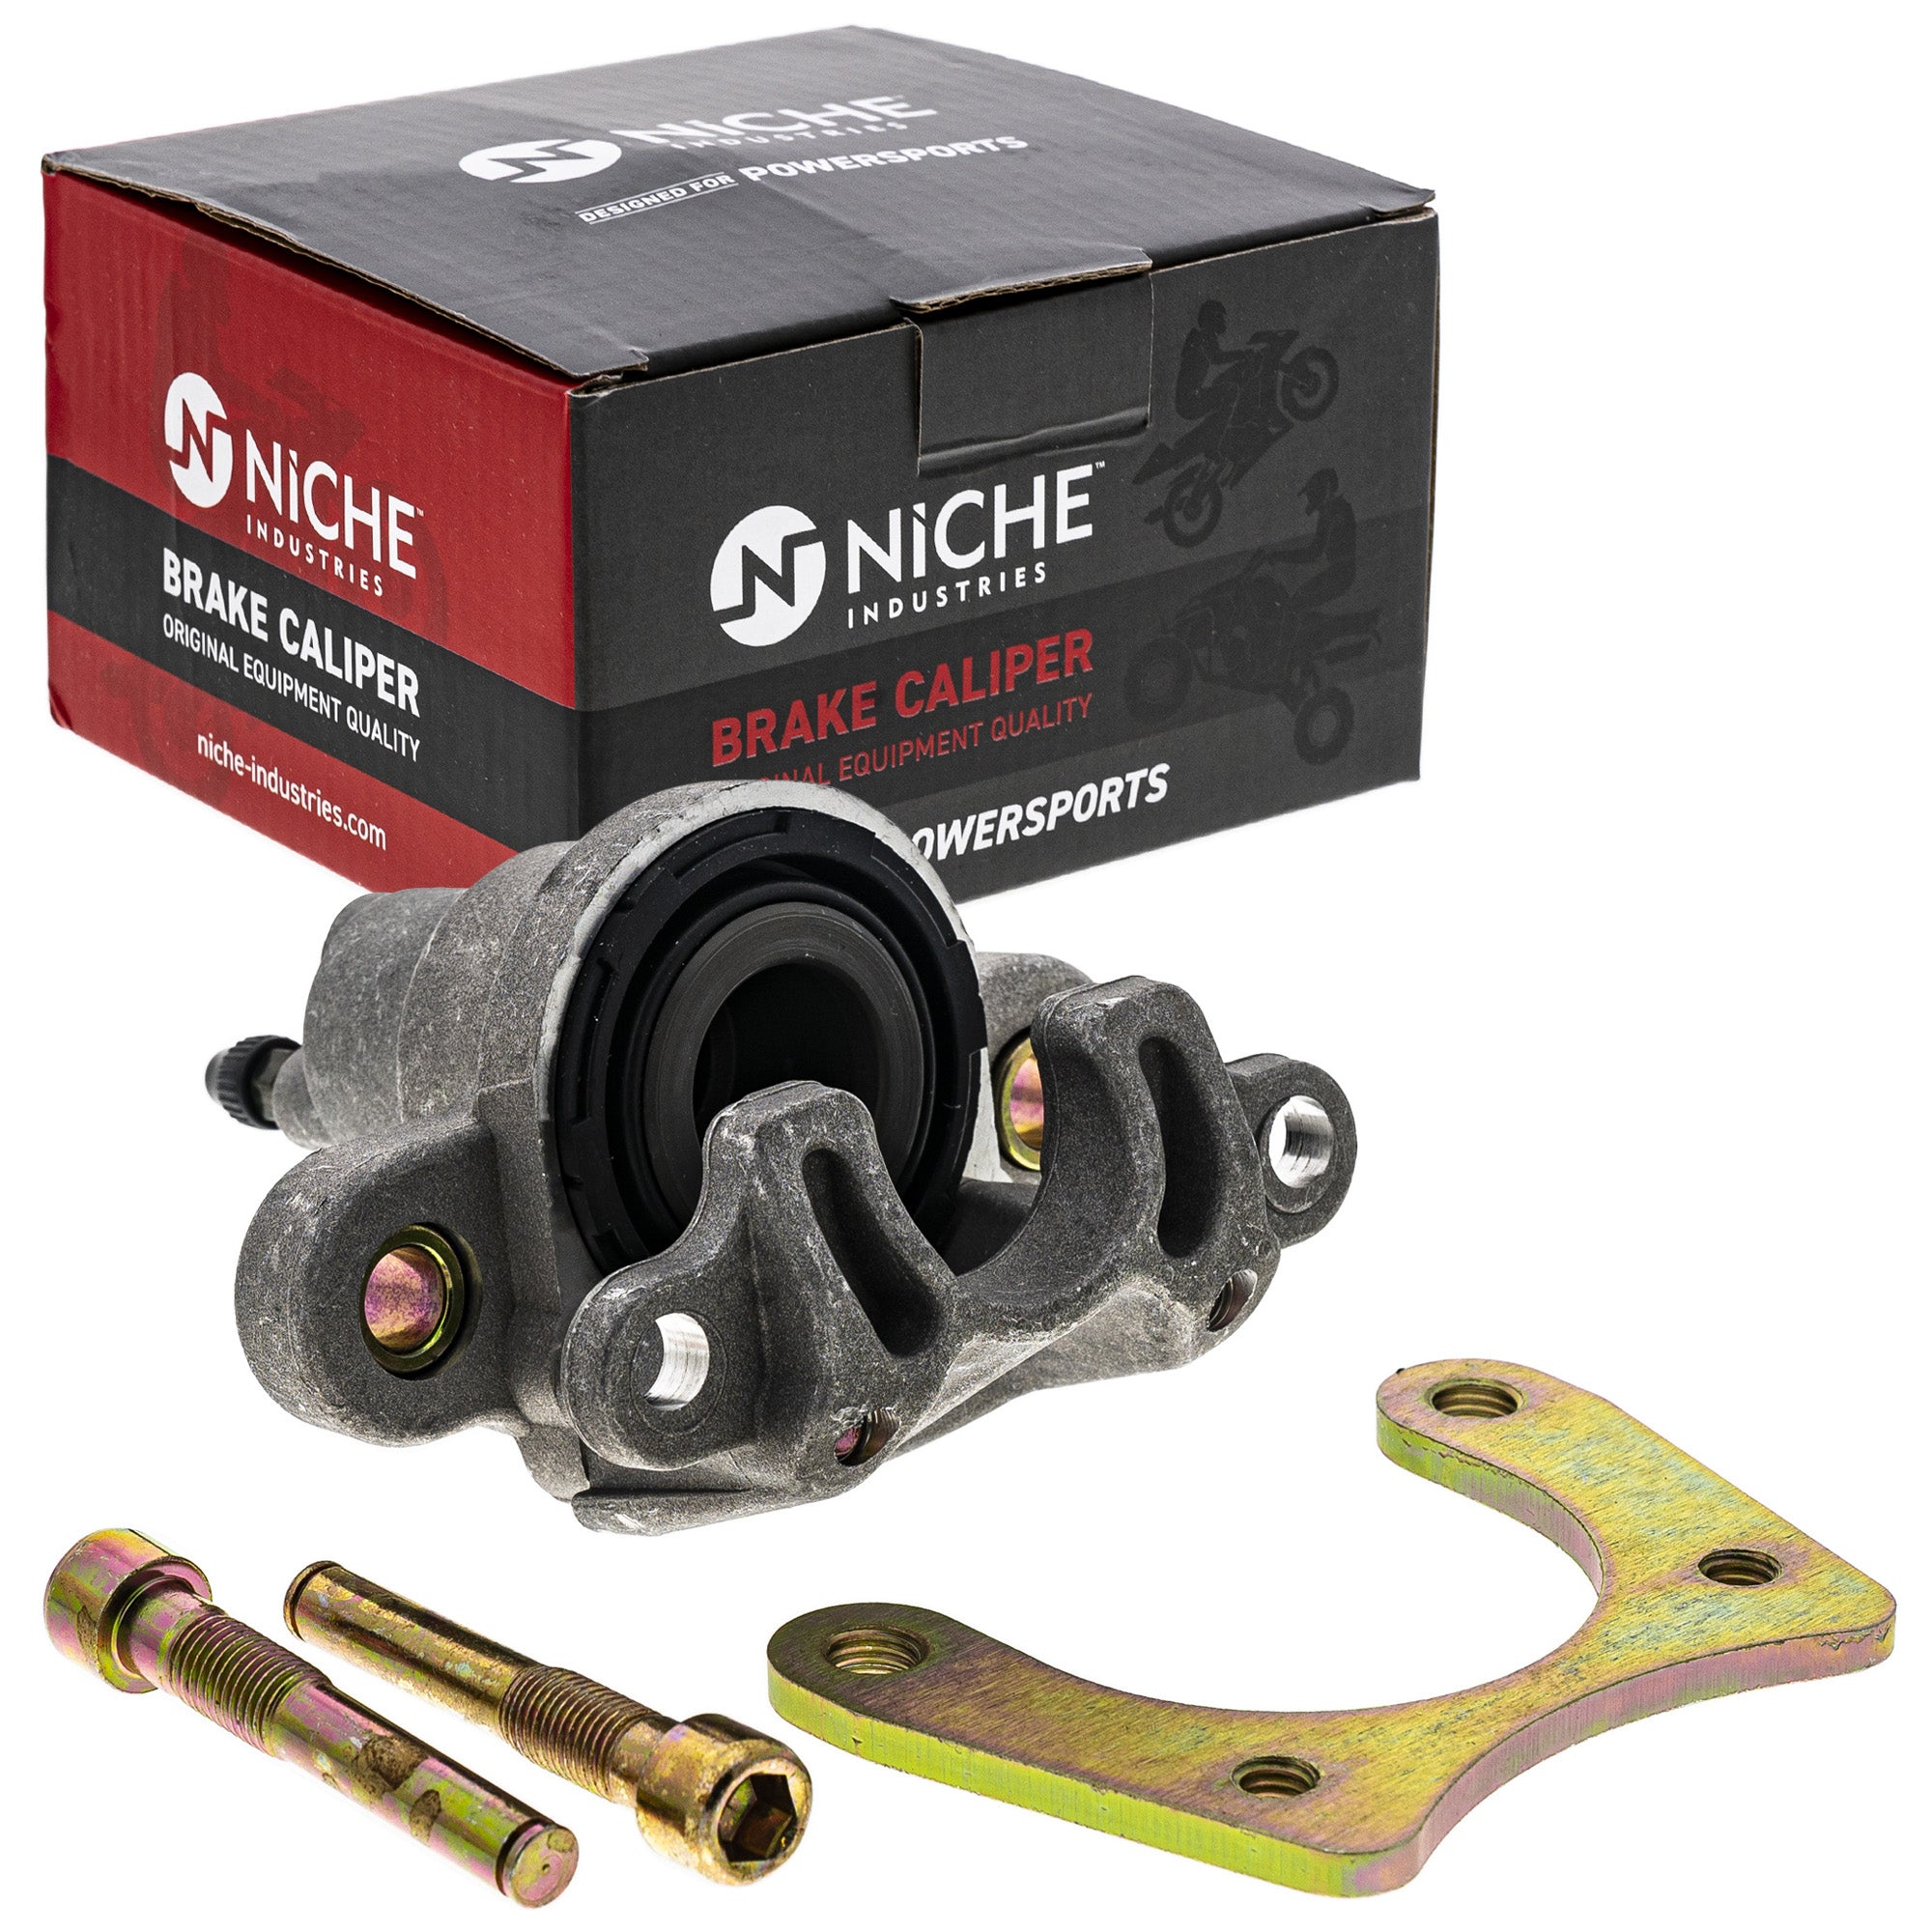 NICHE 519-CCL2253P Brake Caliper Assembly 2-Pack for zOTHER Polaris